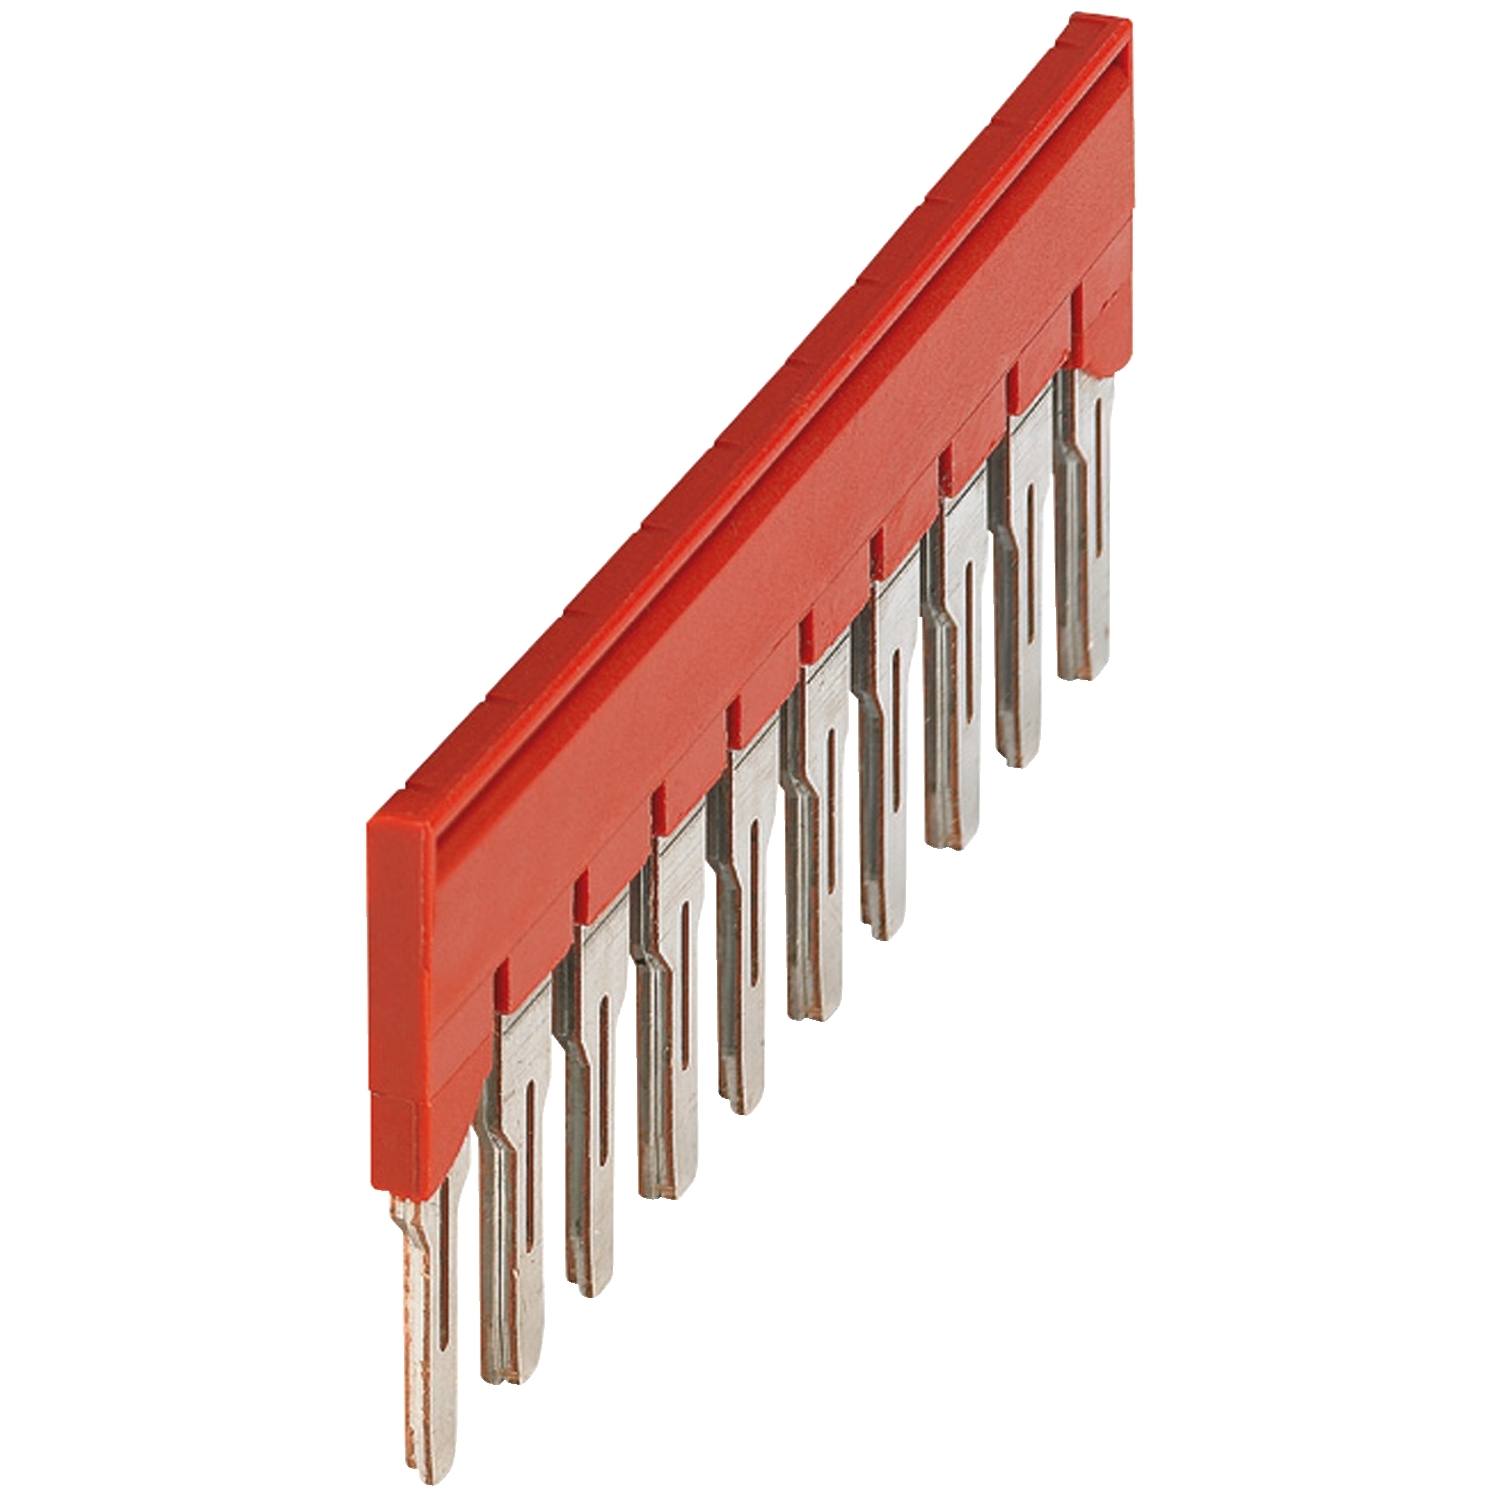 Plug-in bridge, Linergy TR, 10 points for 6mm² terminal blocks, red, 10 way, set of 10